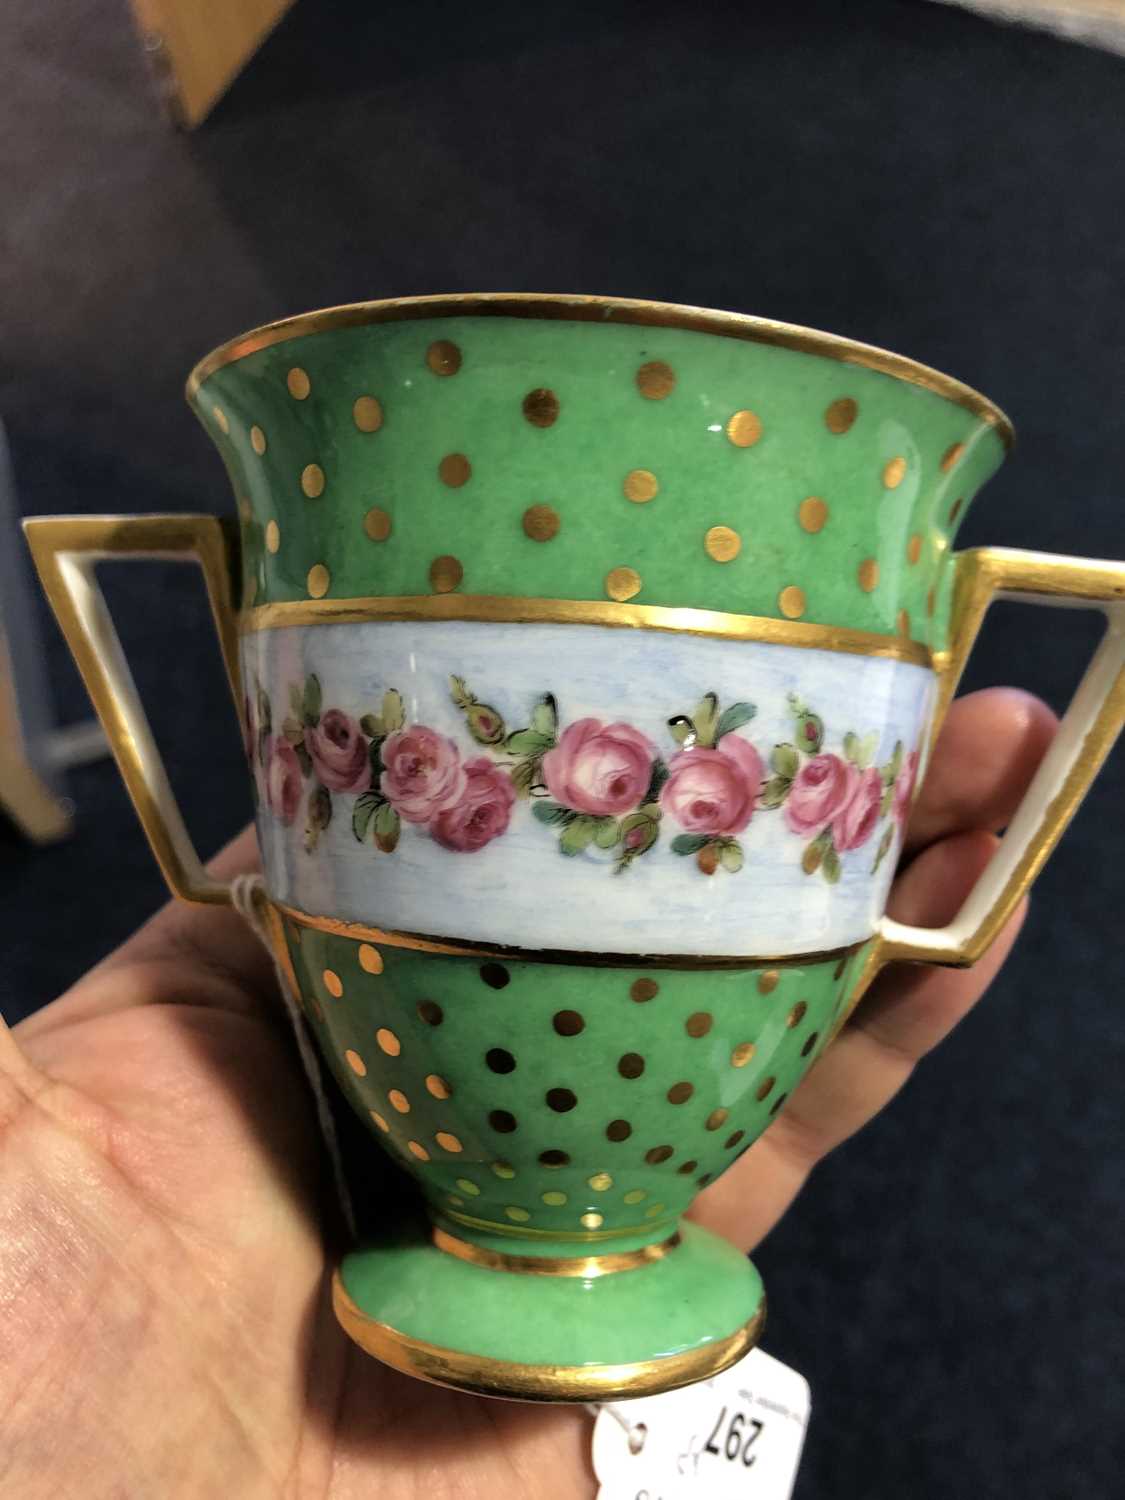 A late 18th century Serves two handled cup, with a raised central band decorated with roses and - Image 13 of 14